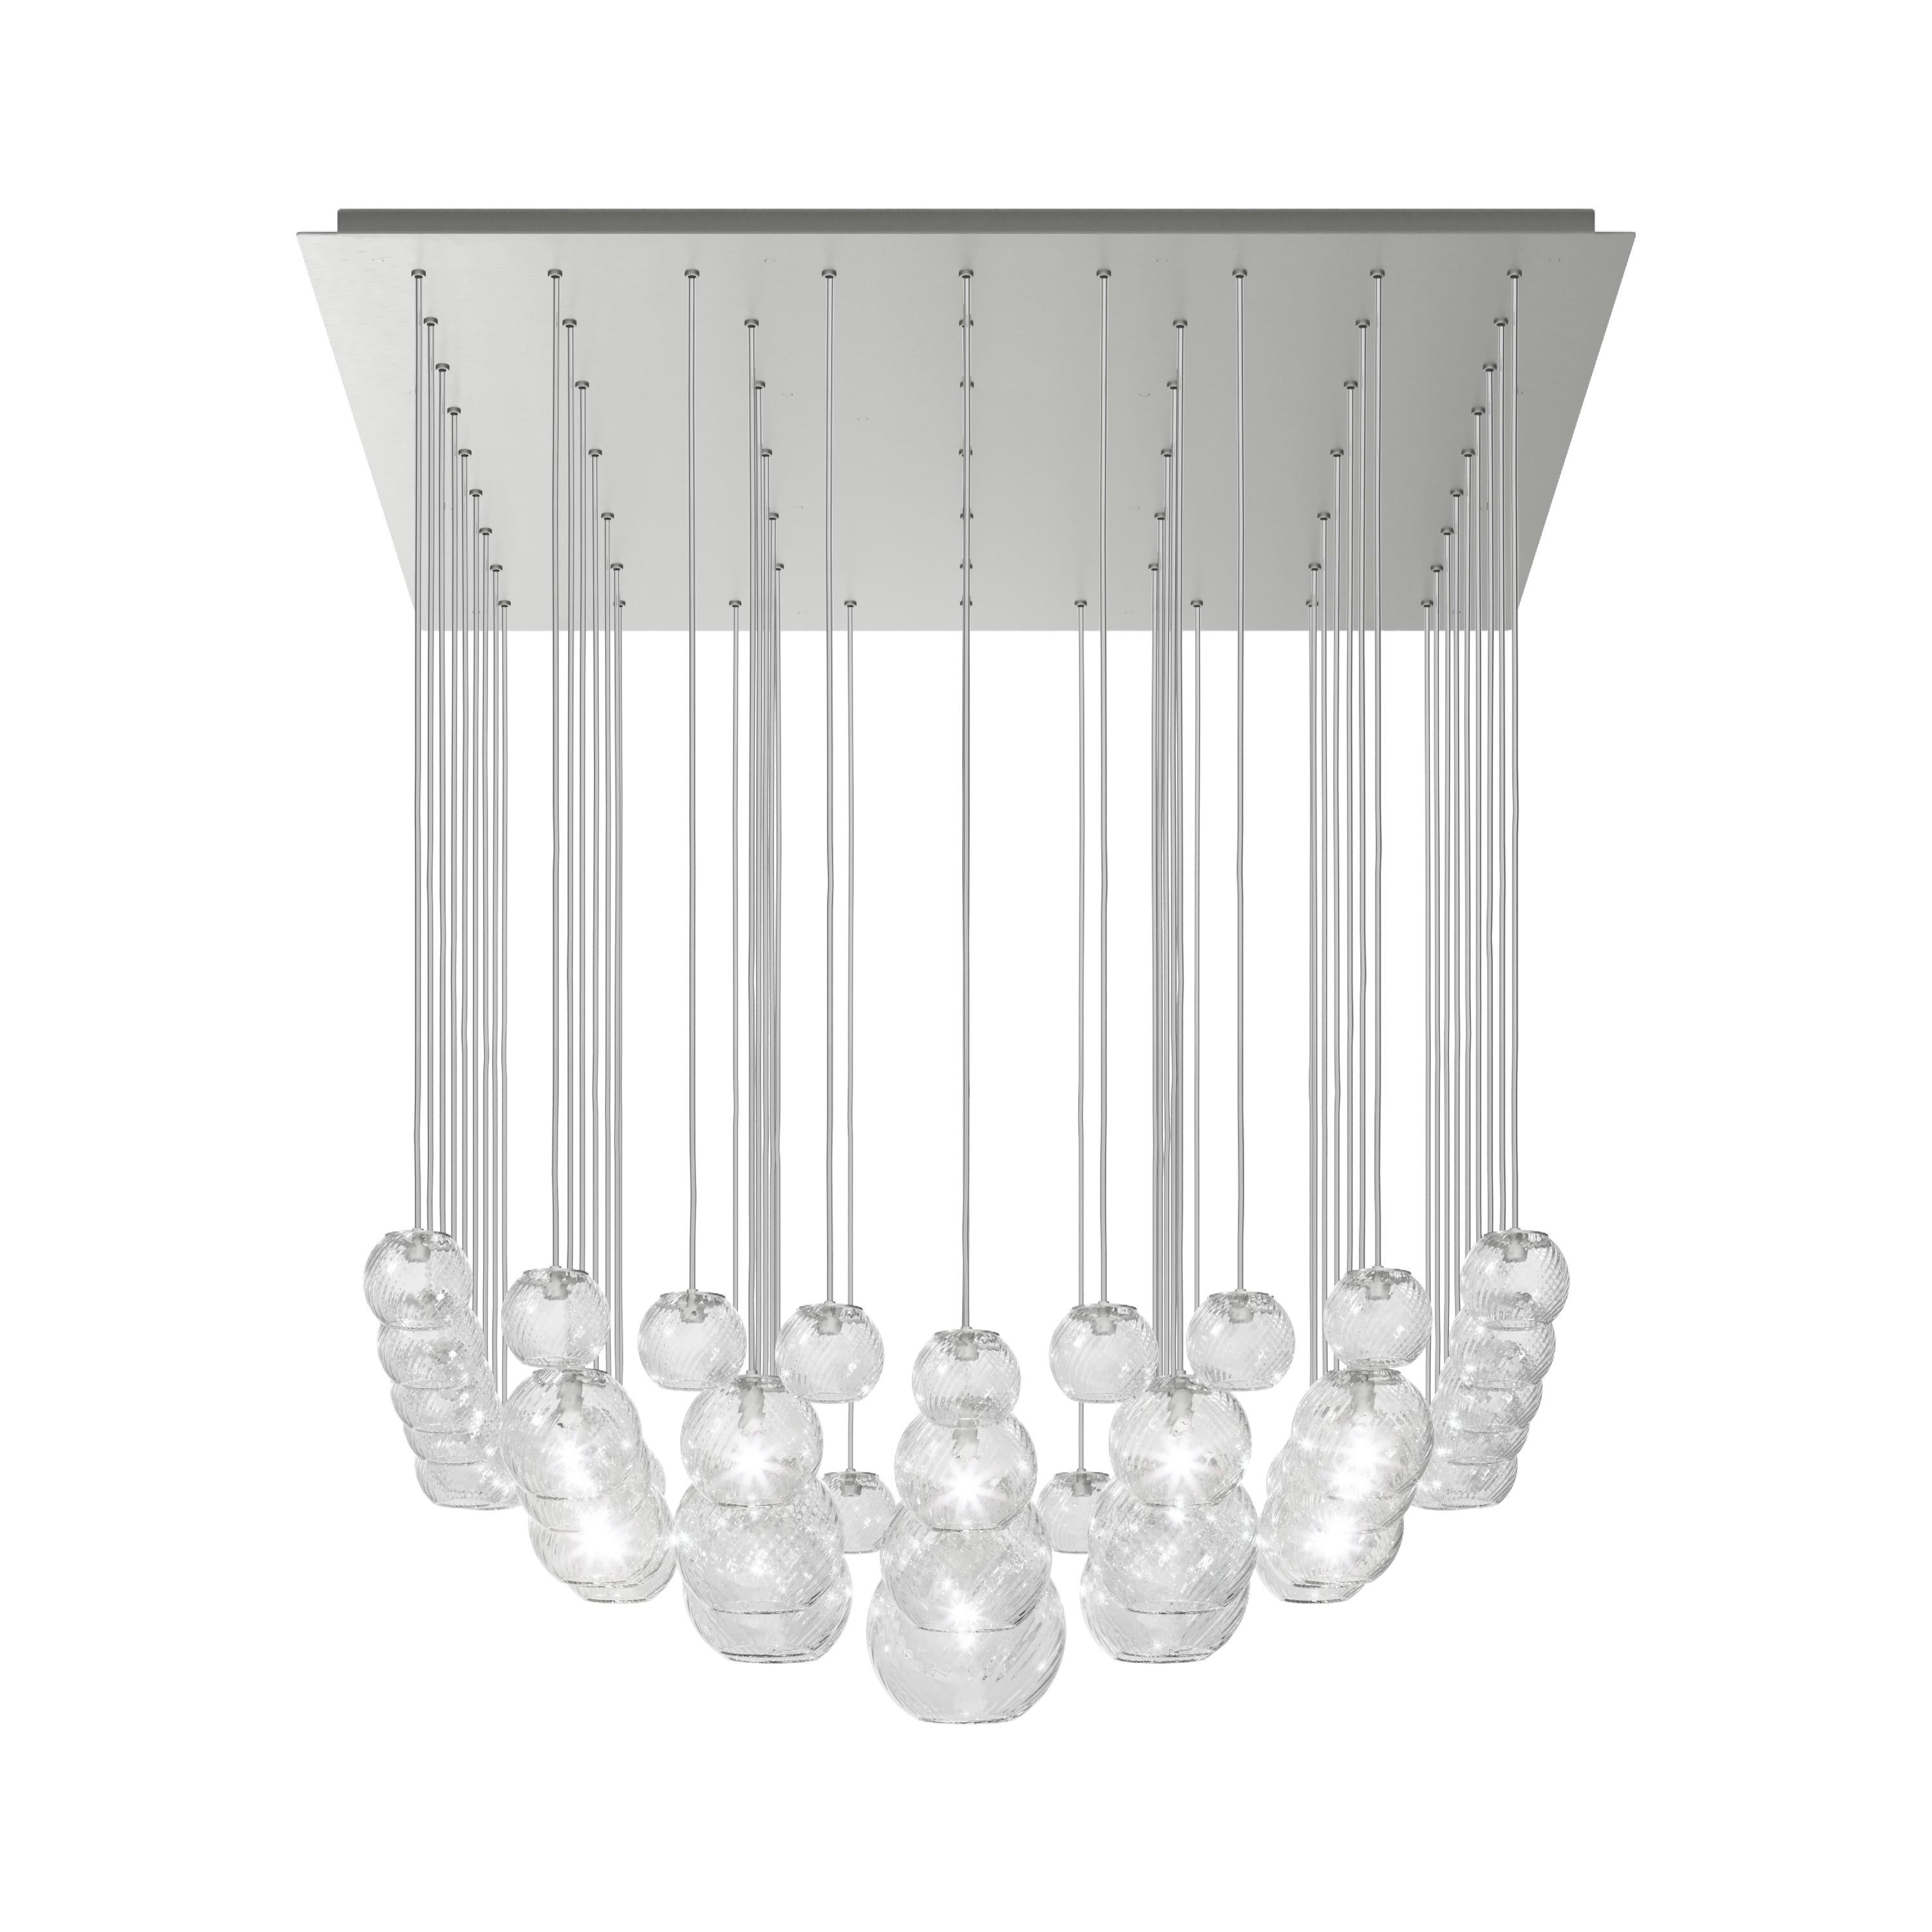 Modern Vistosi Pendant Light in Crystal Striped Glass And Satin Nickel Frame For Sale